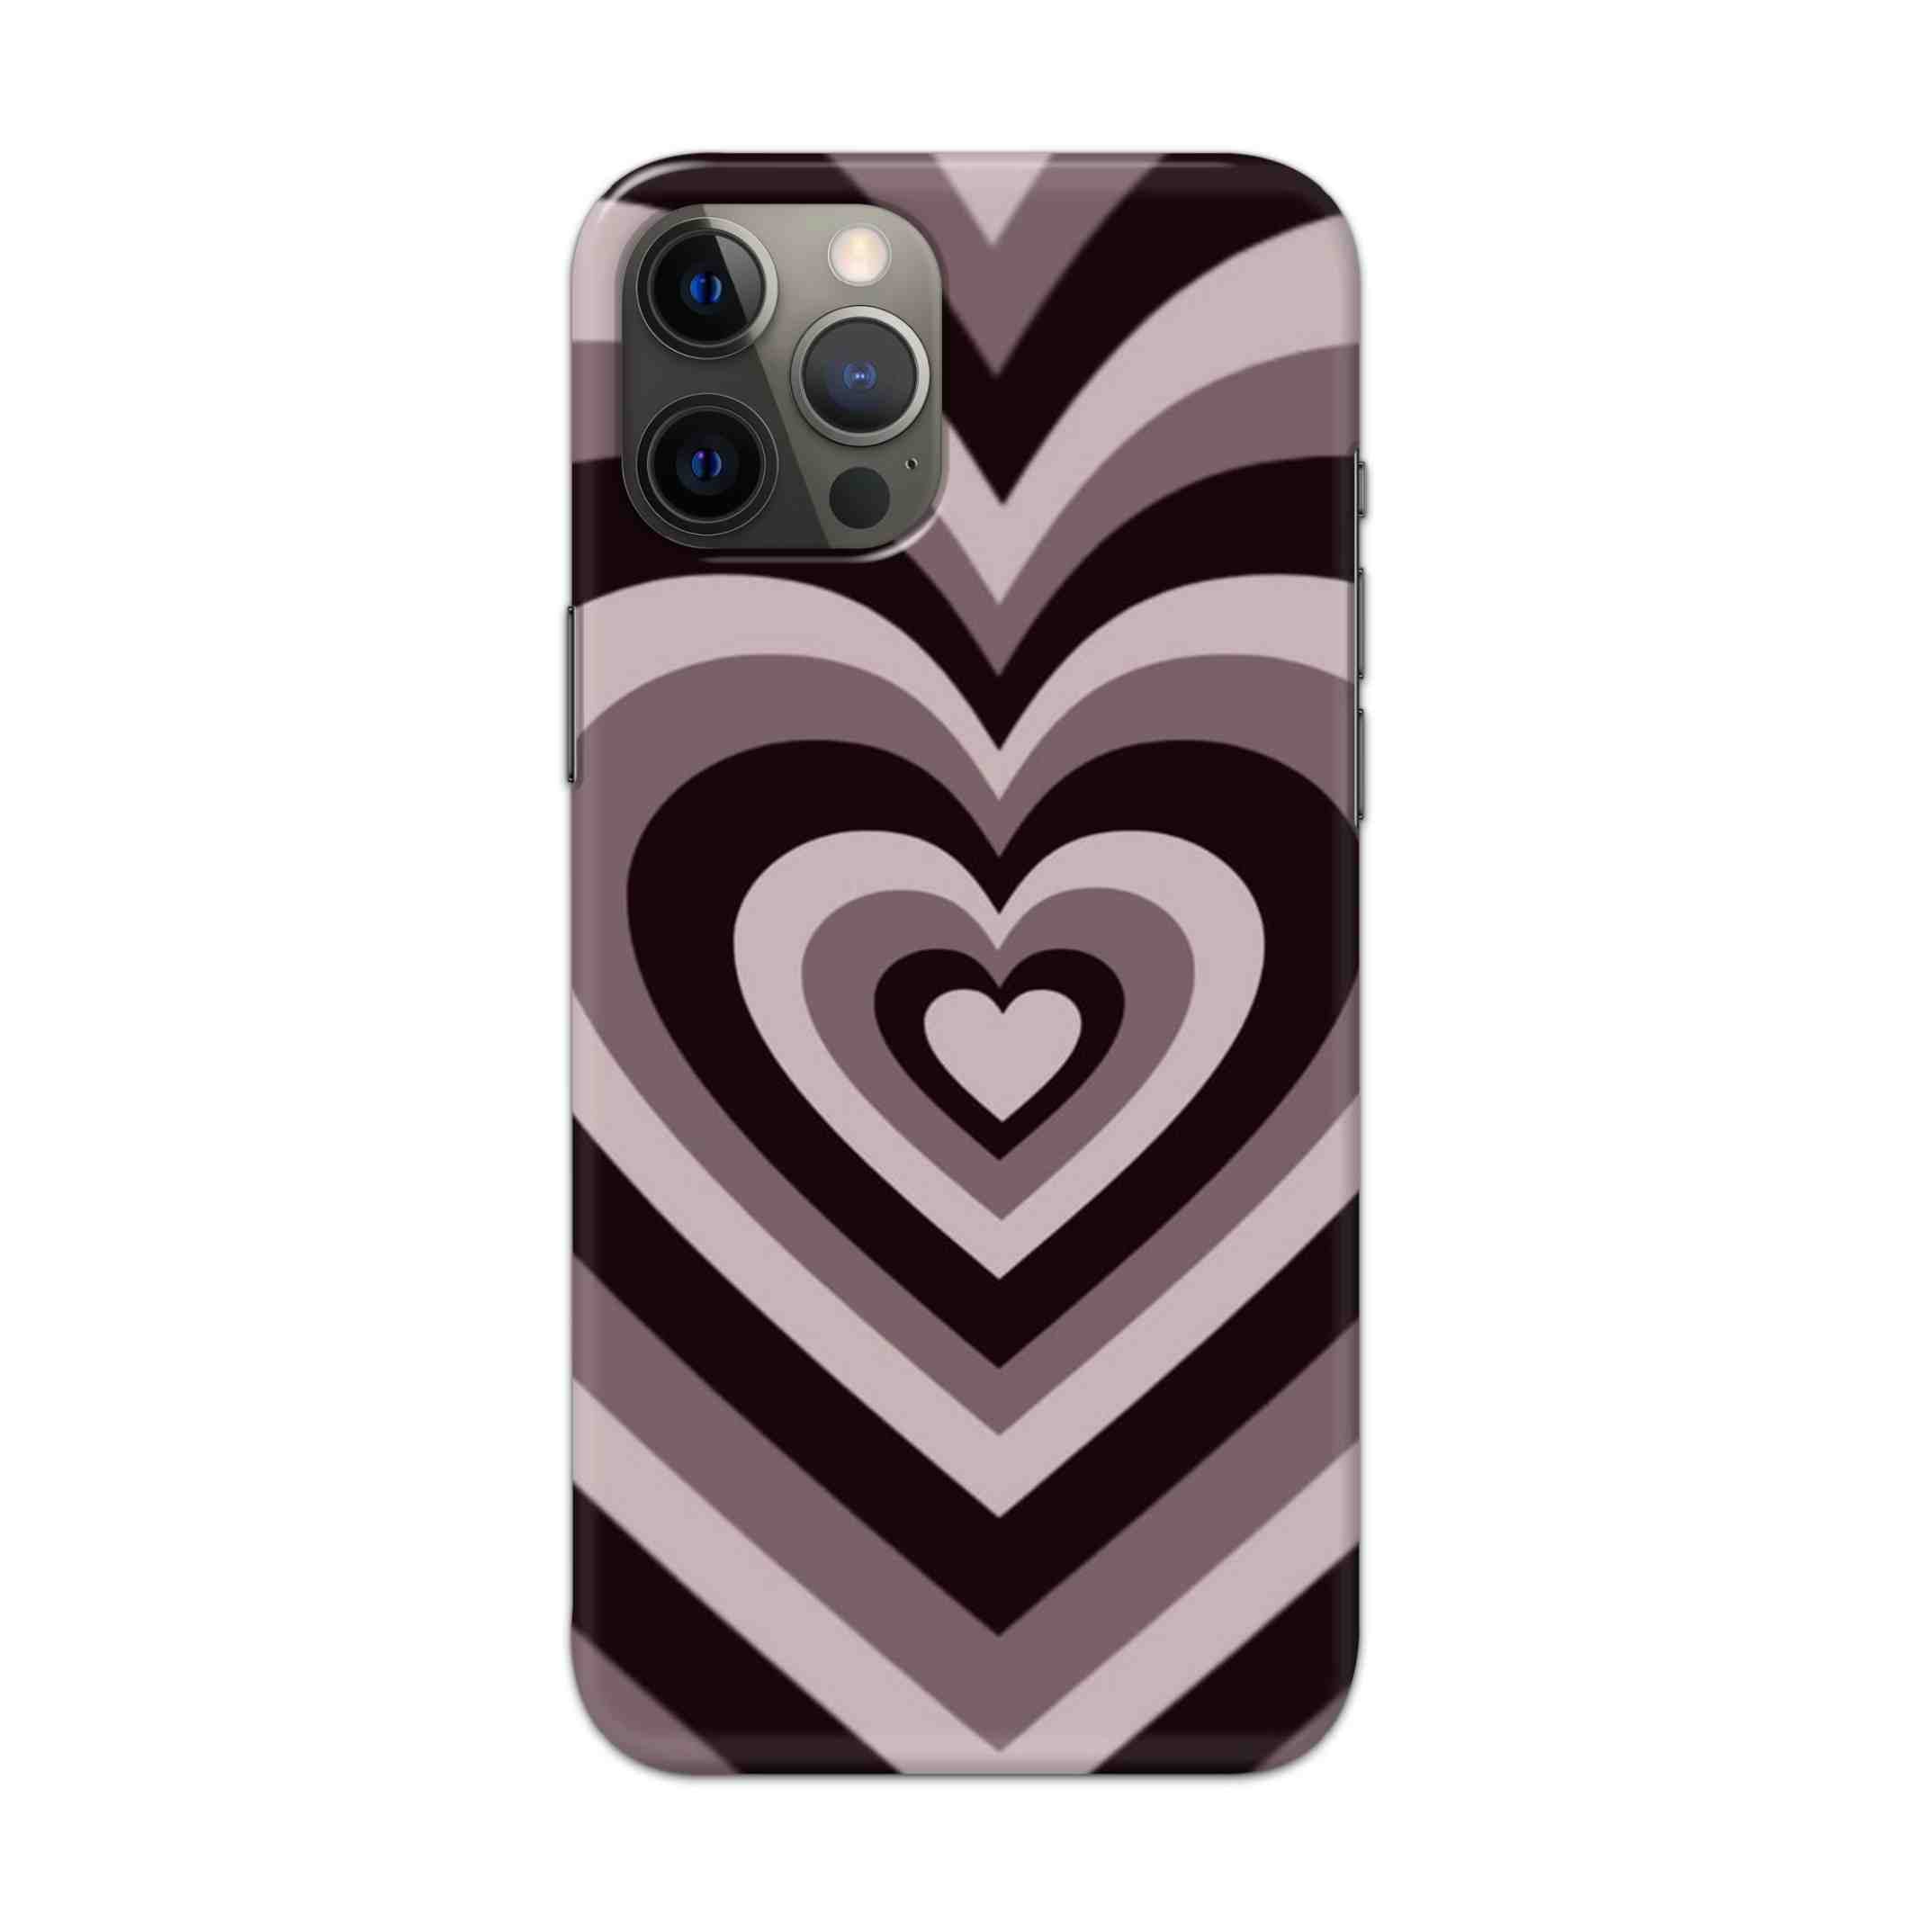 Buy Black Brown Heart Hard Back Mobile Phone Case Cover For Apple iPhone 12 pro max Online